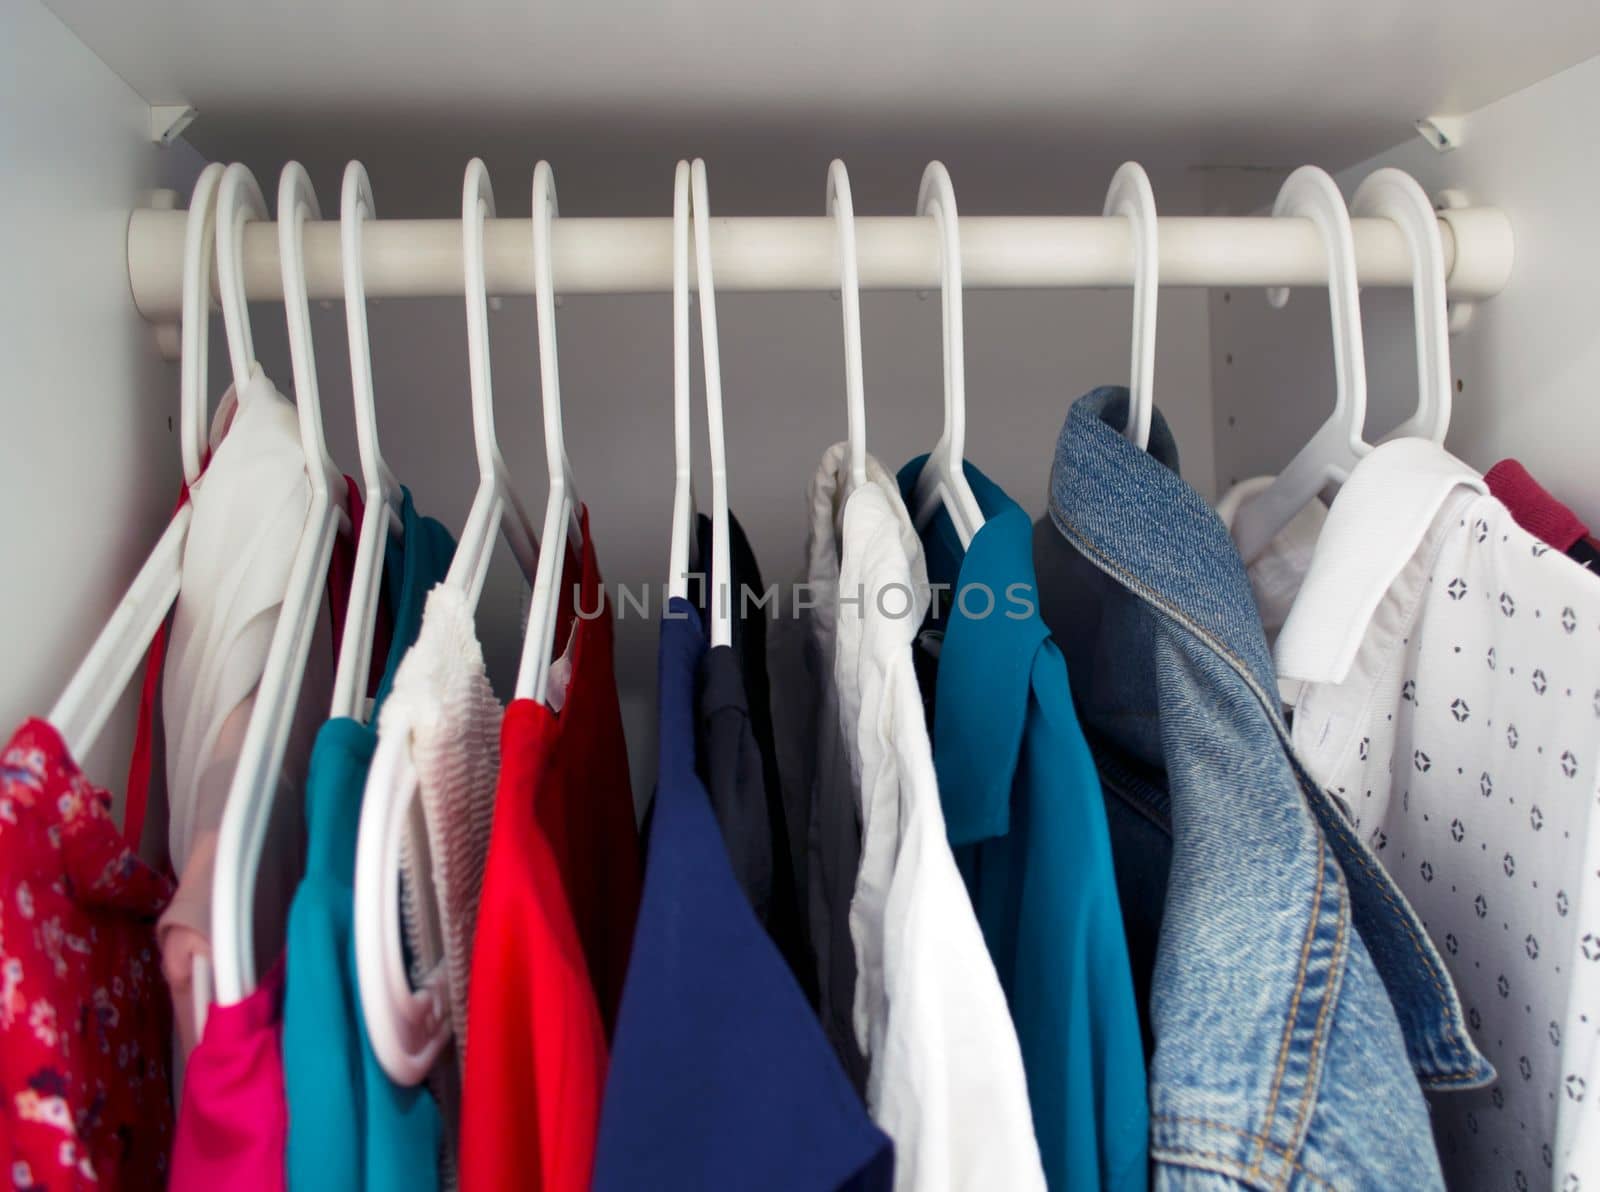 
Clothes on hangers in the closet. Photo of colored clothes on white hangers in the closet.